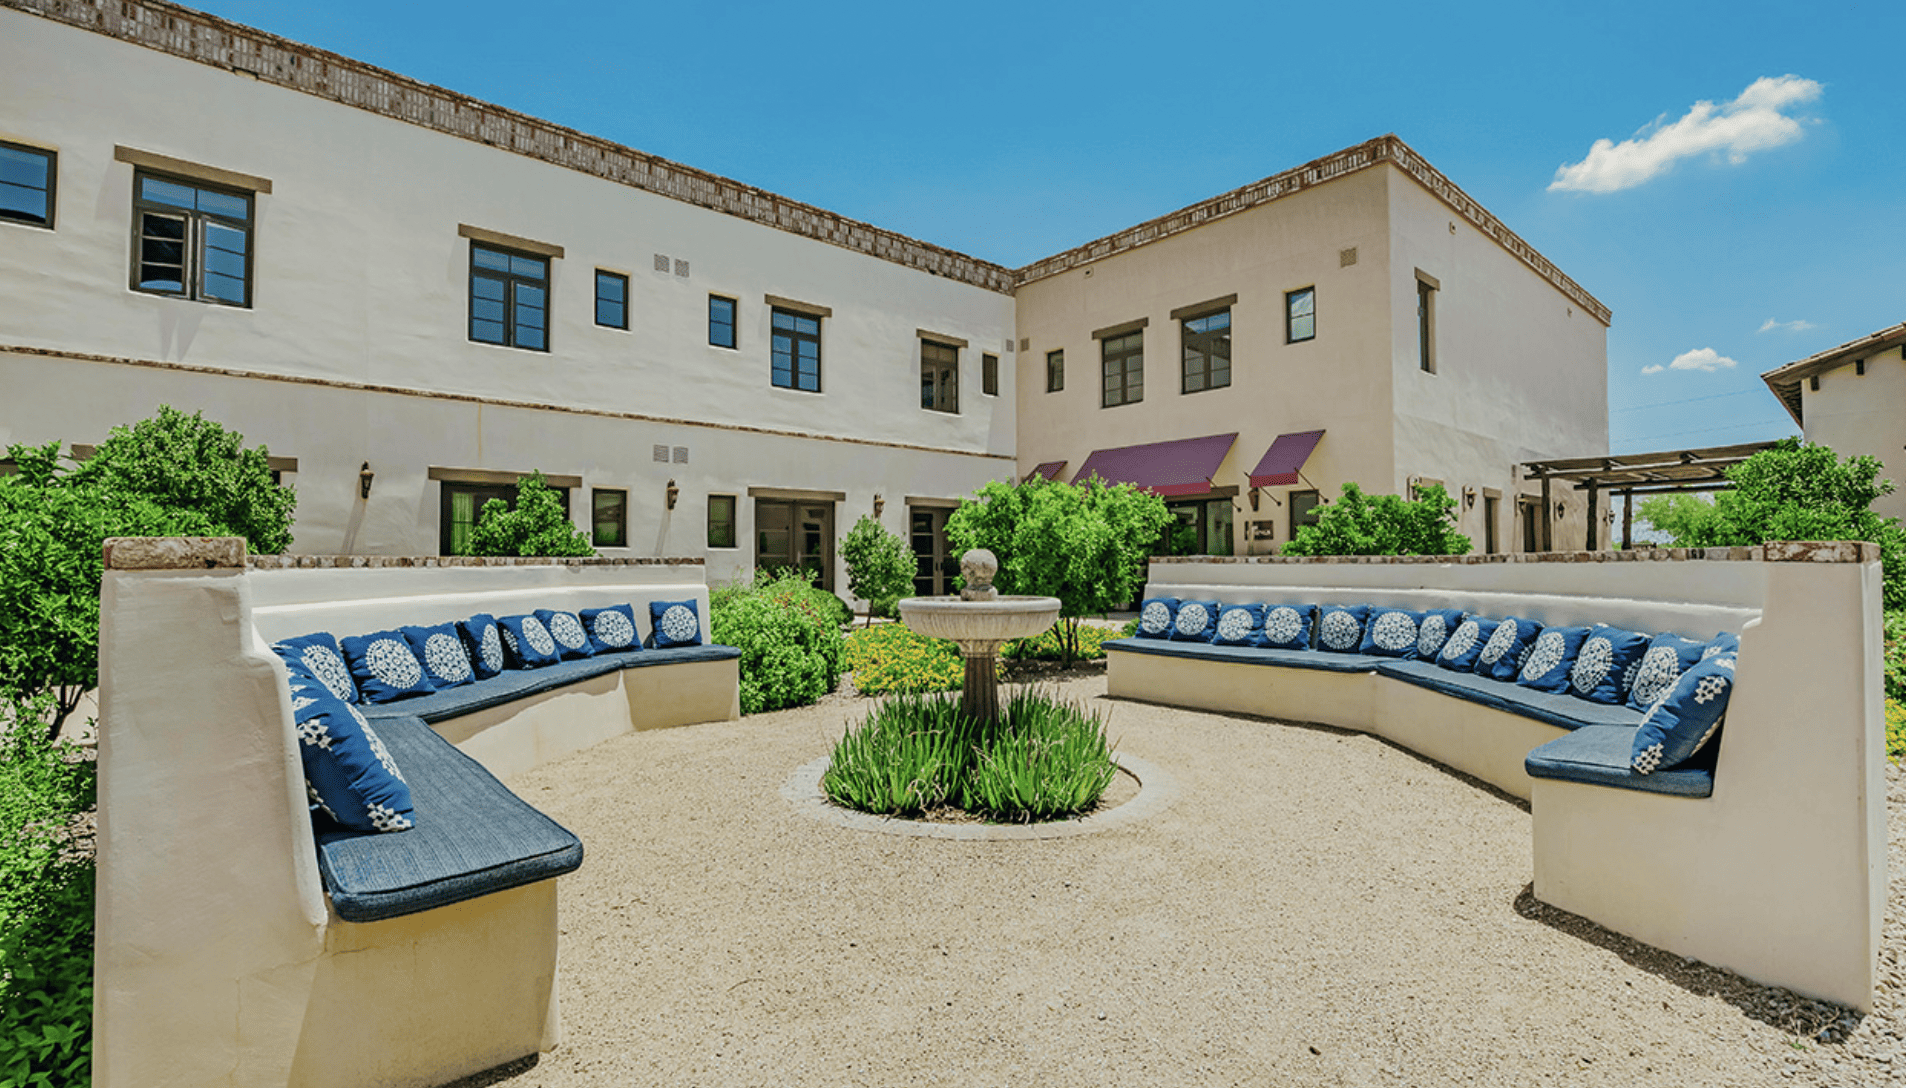 An outdoor seating area and courtyard of the Hacienda at the River.